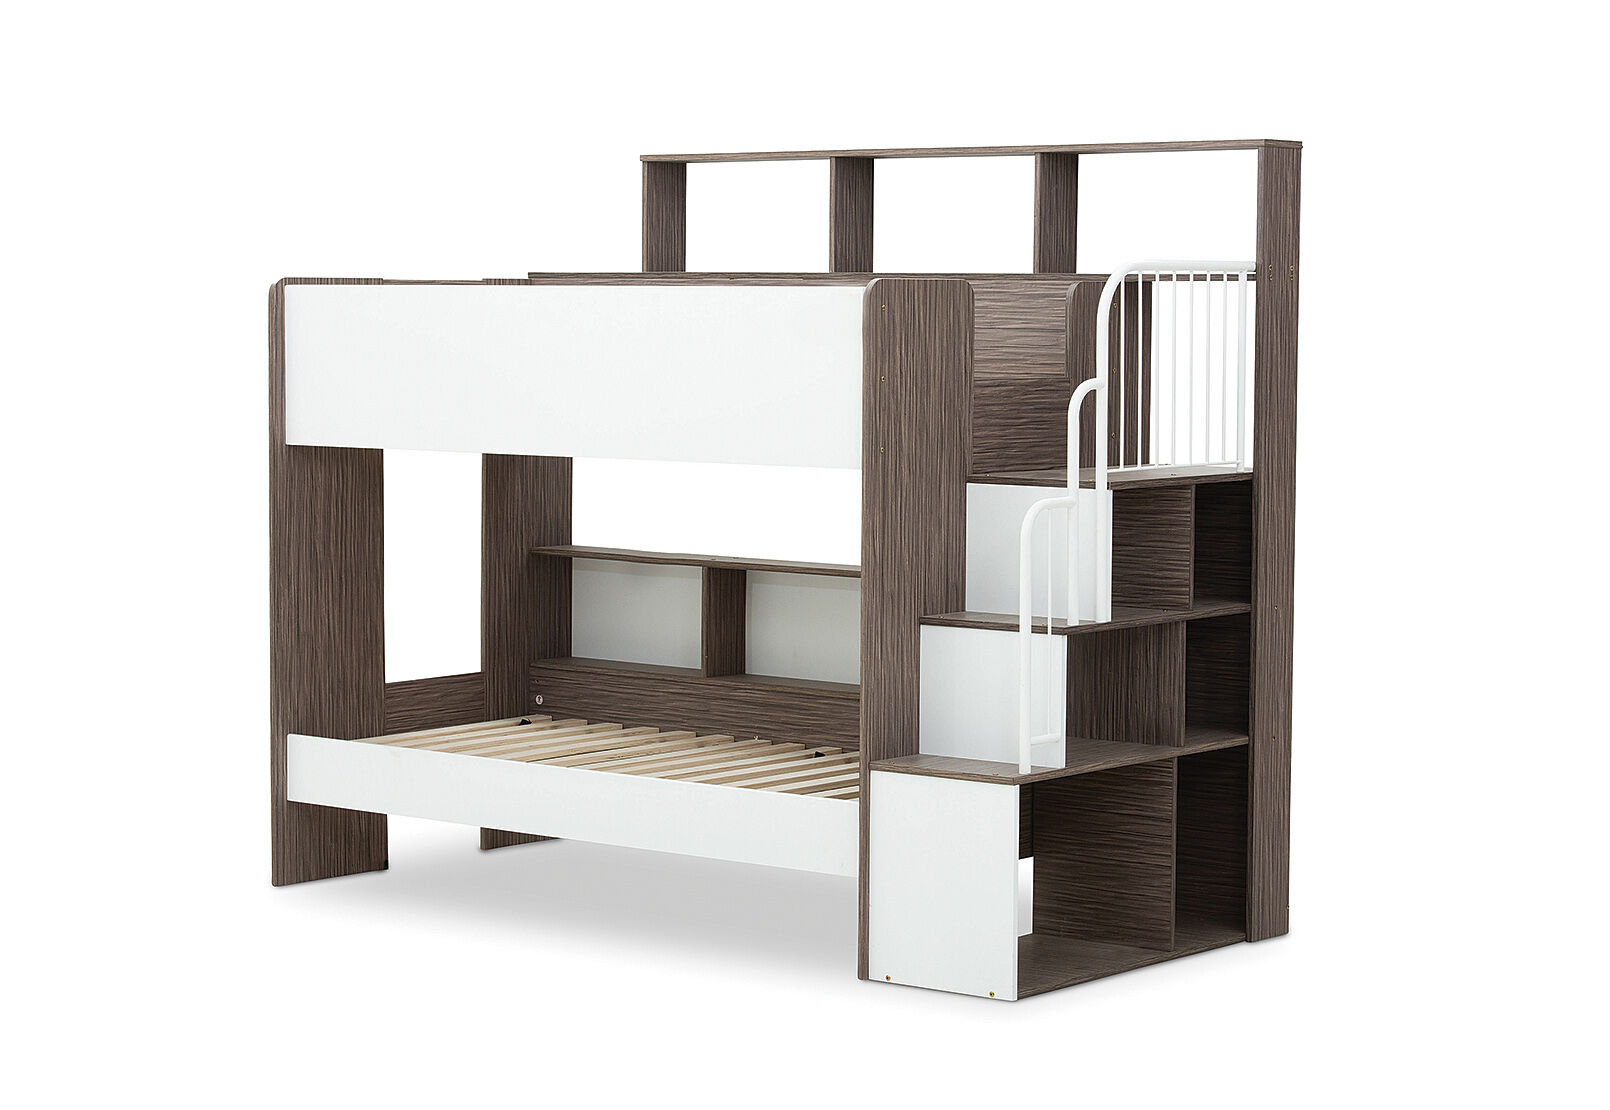 White Tango Jason Mk2 Double Bunk Bed, Acme Jason Bunk Bed With Stairs